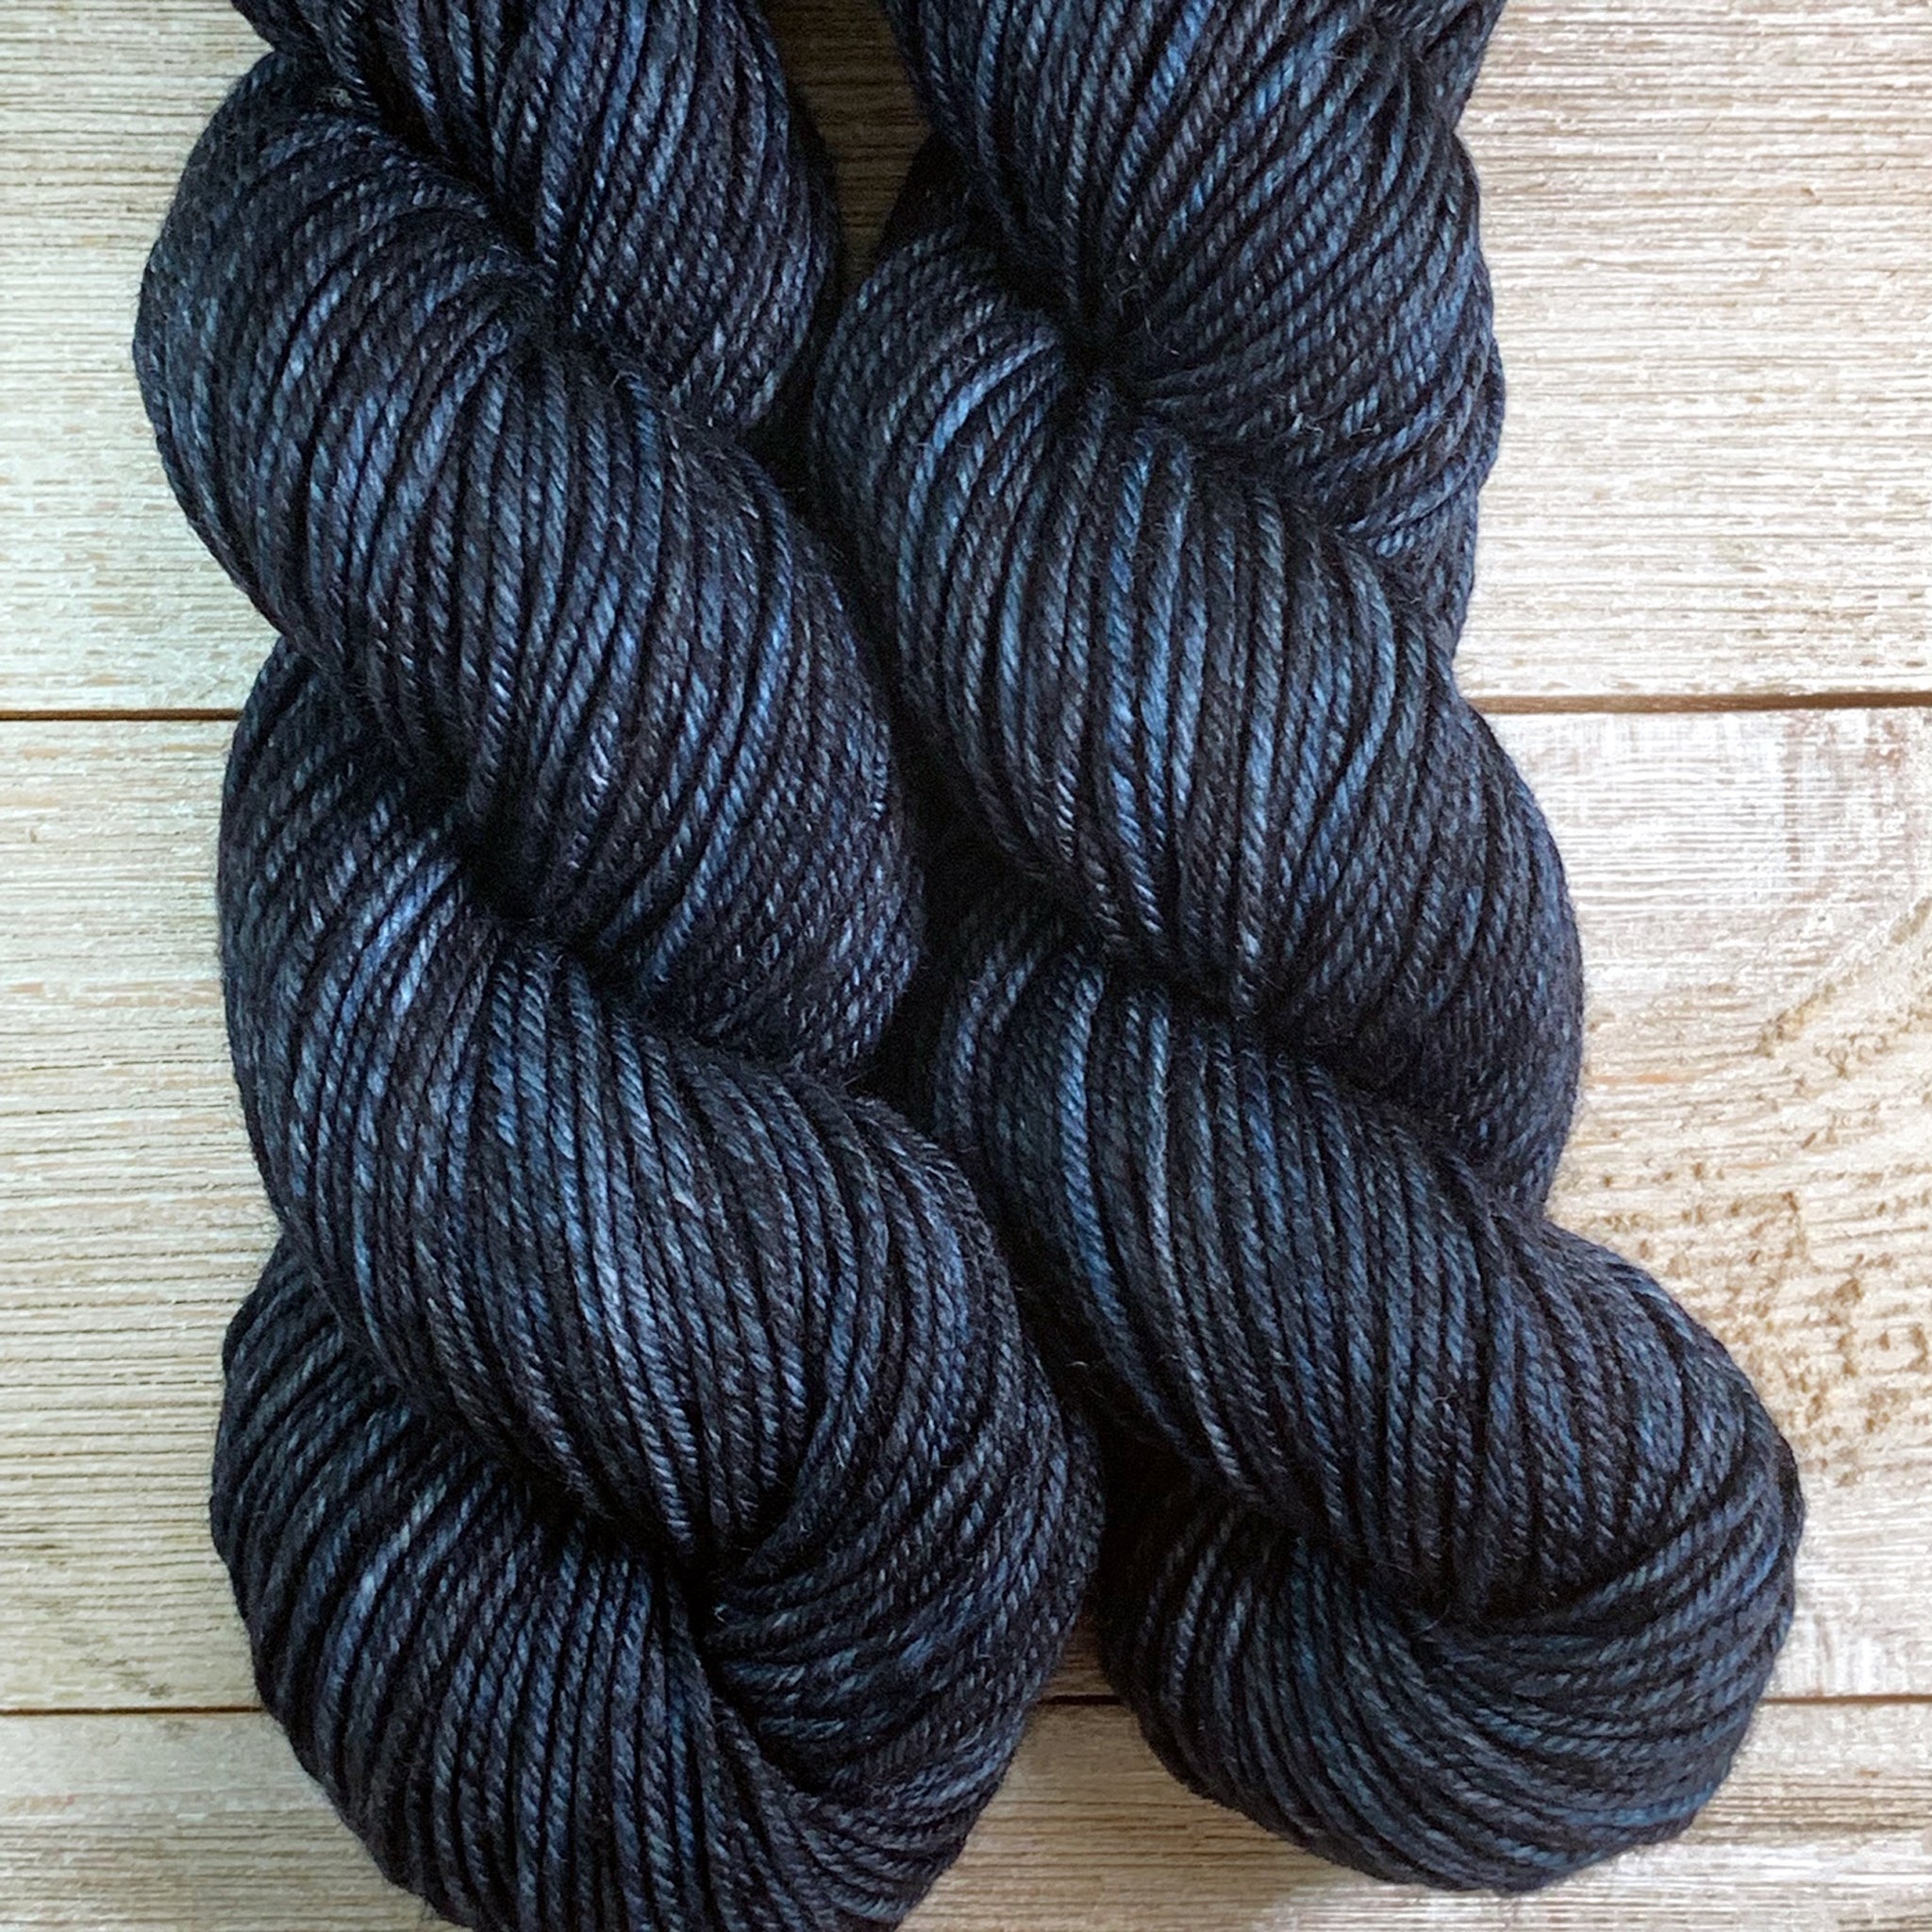 ww kashmir Forever In Blue Jeans, worsted weight merino and cashmere yarn